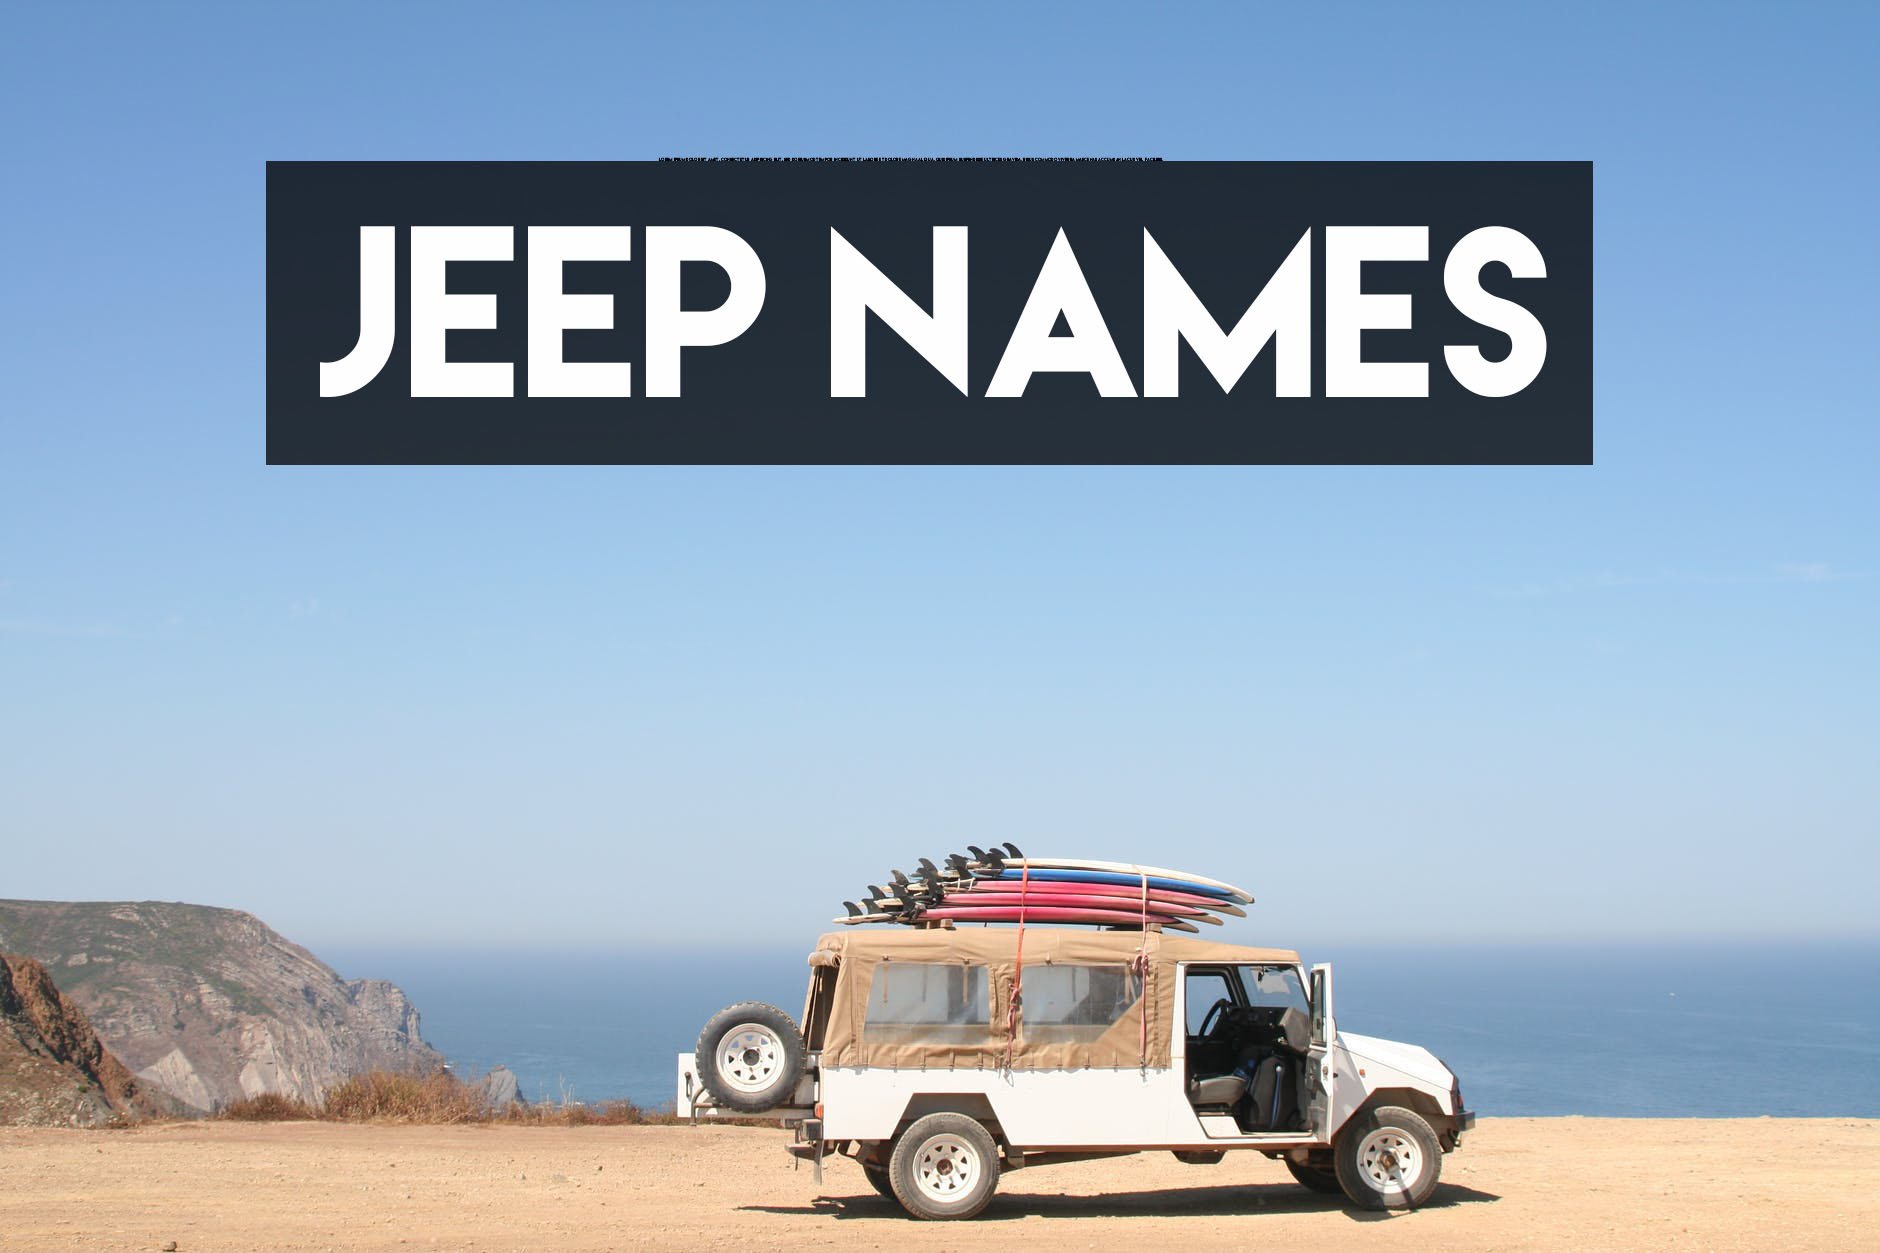 350+ Jeep Names in 2023 that Are Creative, Cool & Funny | Jeep Name Generator